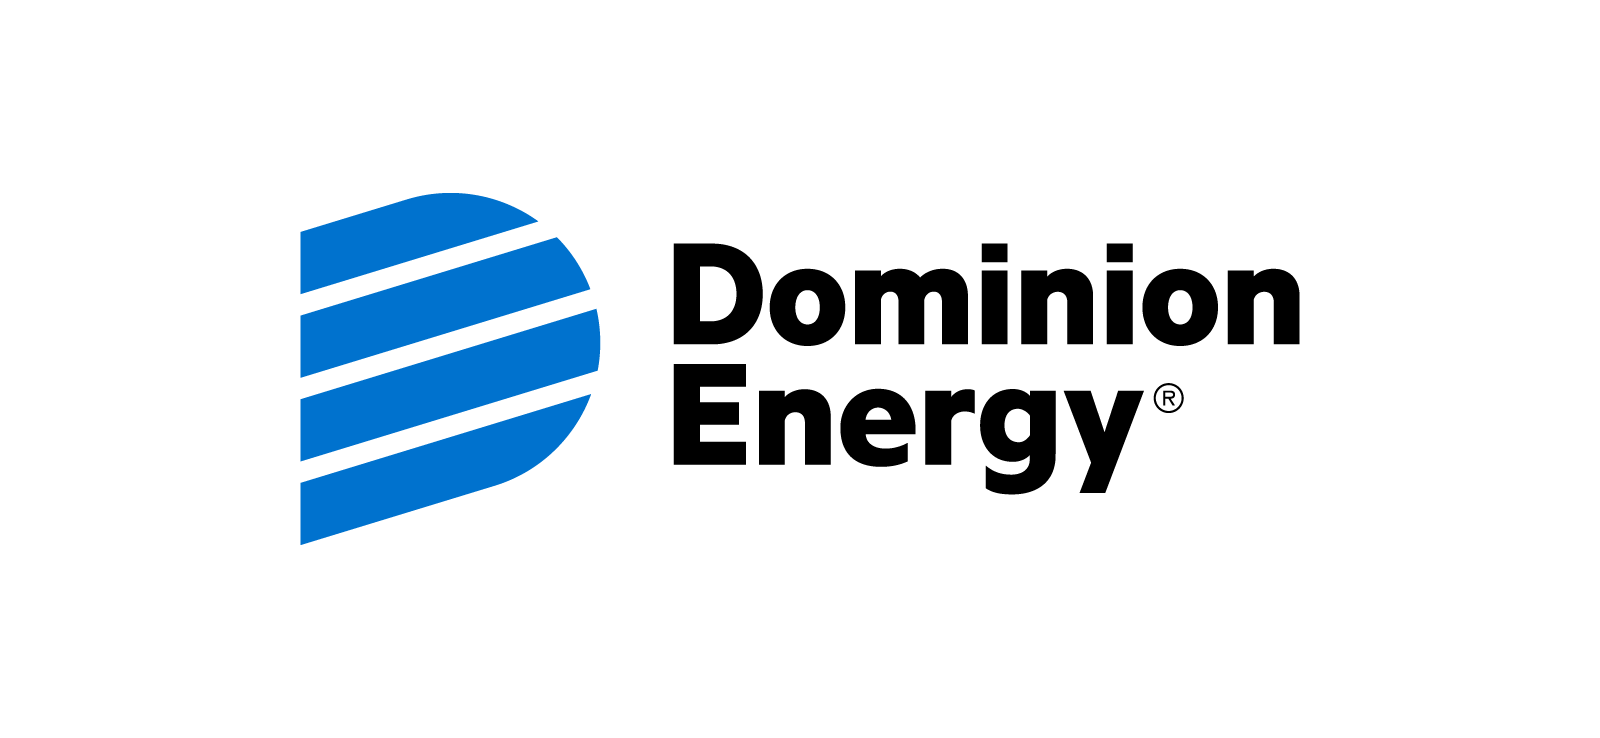 DOMINION ENERGY LOGO LARGE PNG